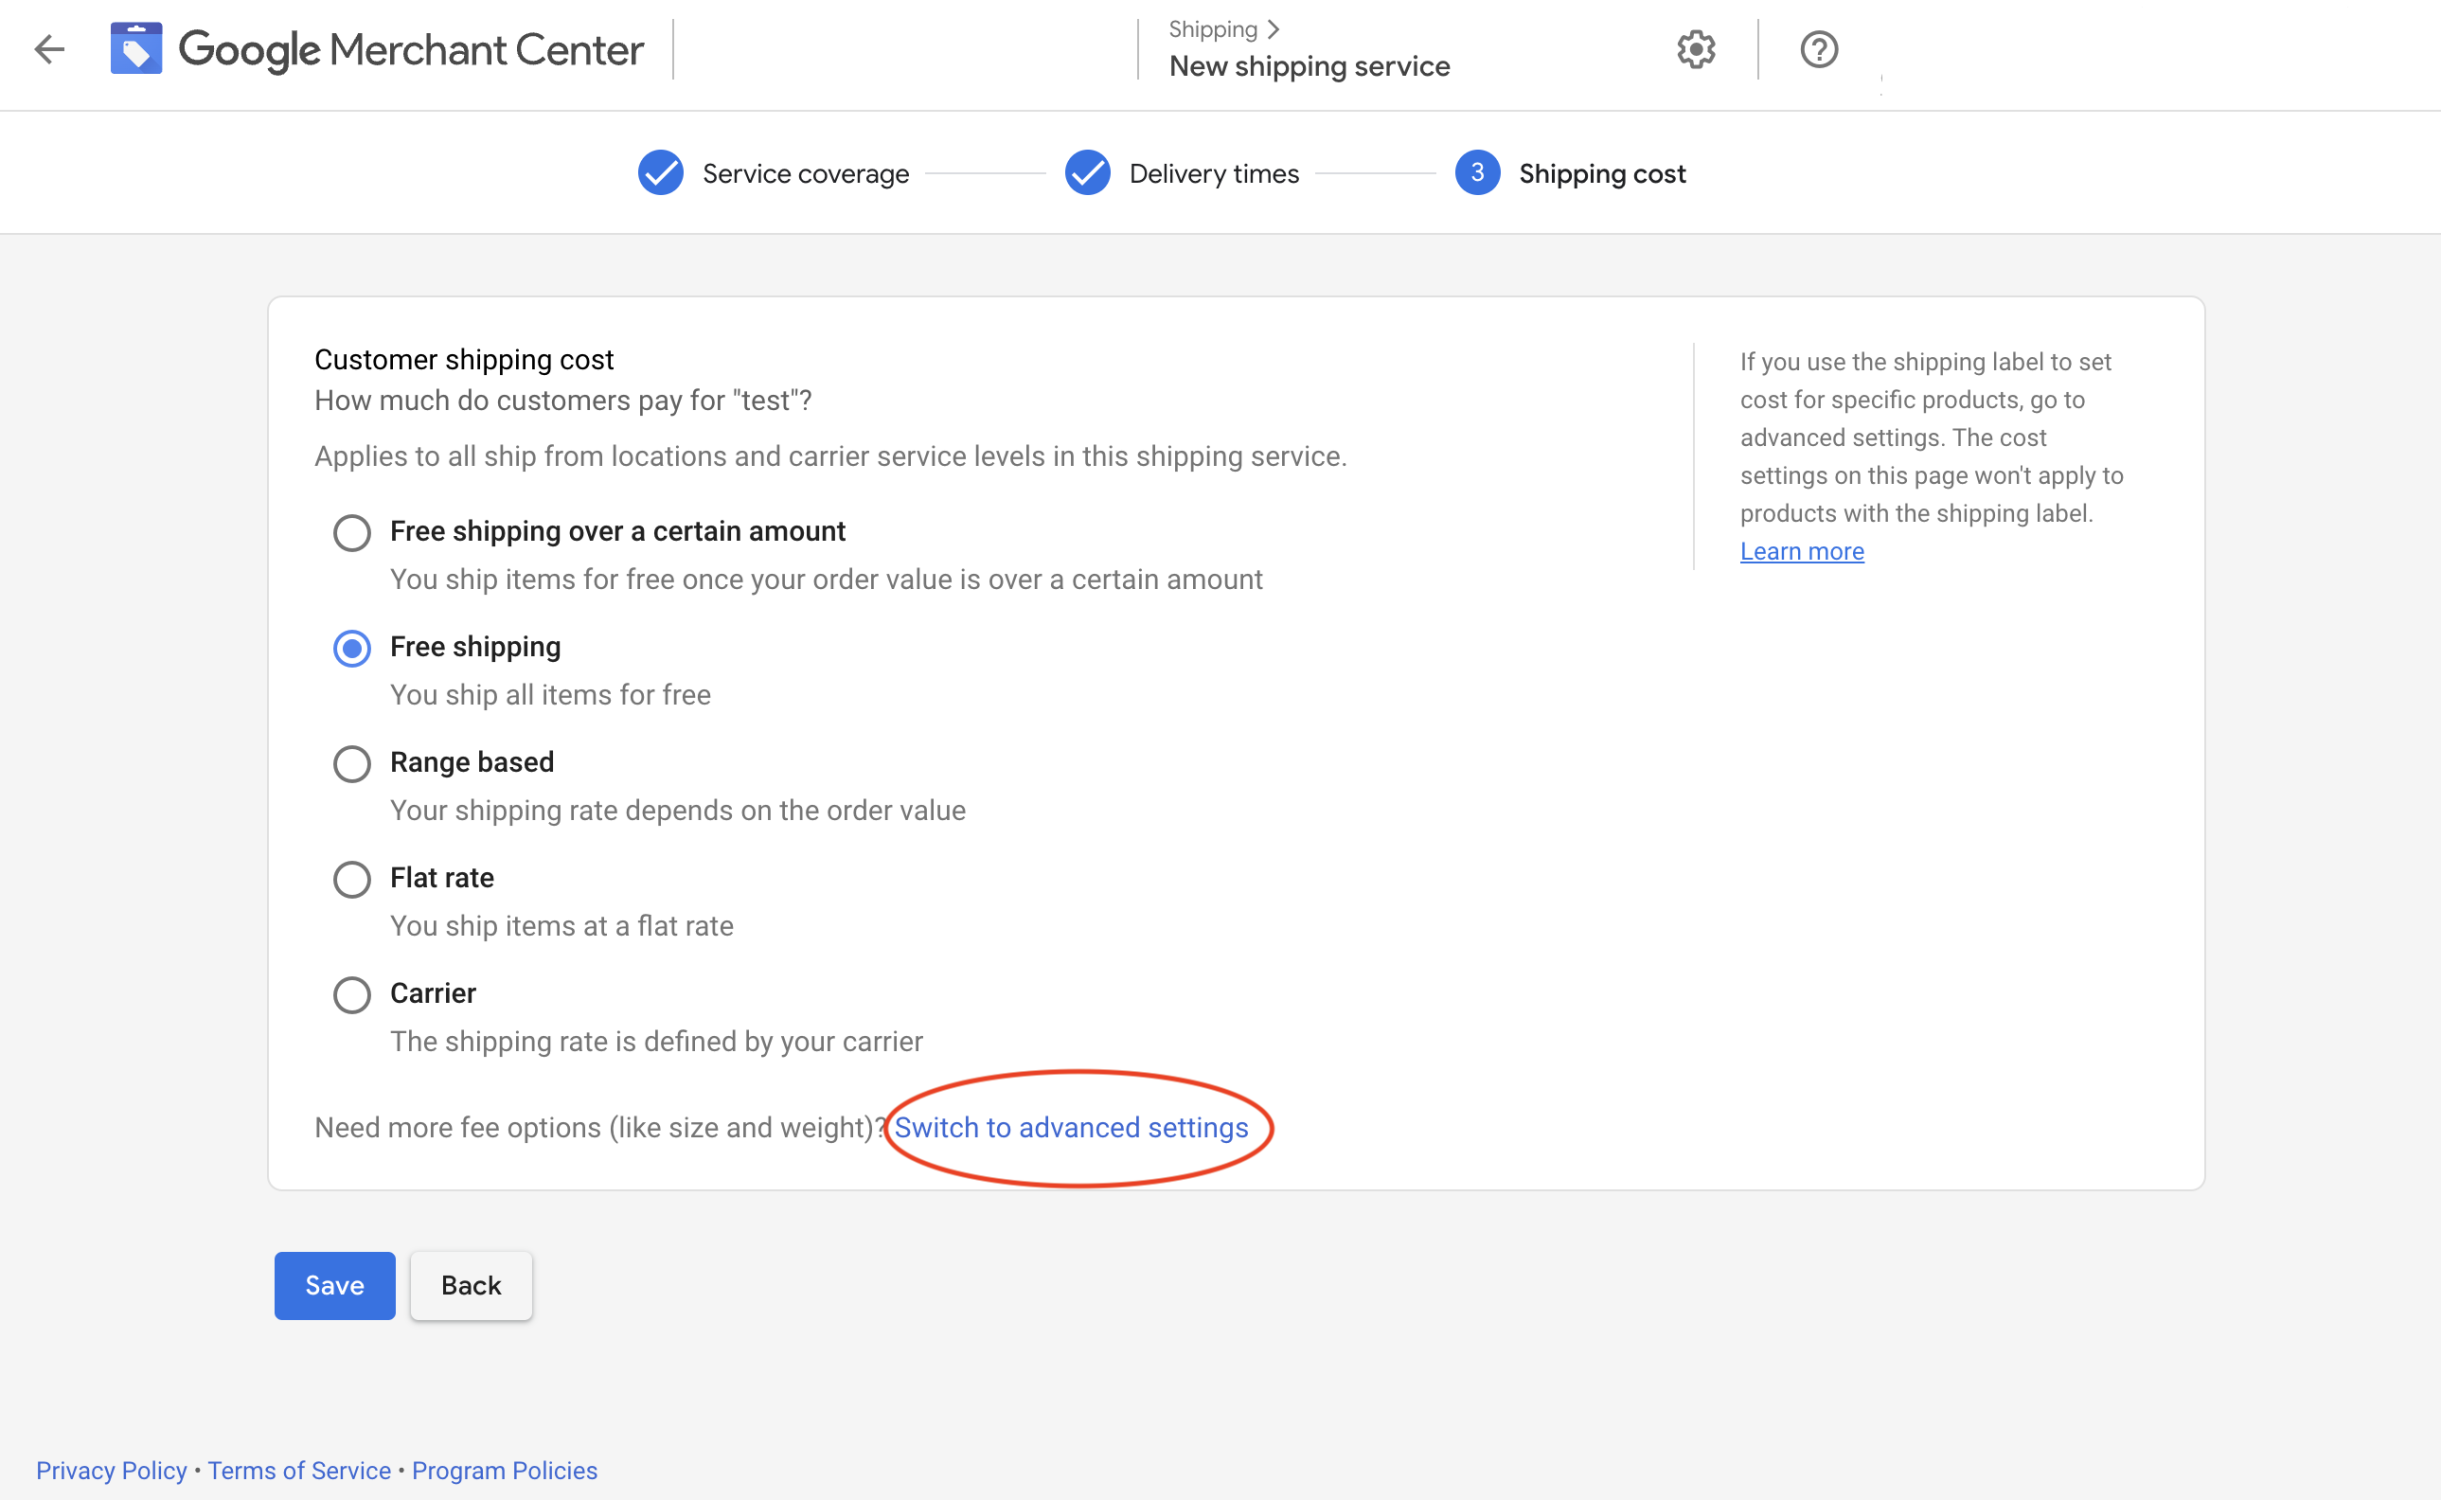 Screen shot of where to location advanced shipping settings in Google Merchant Center